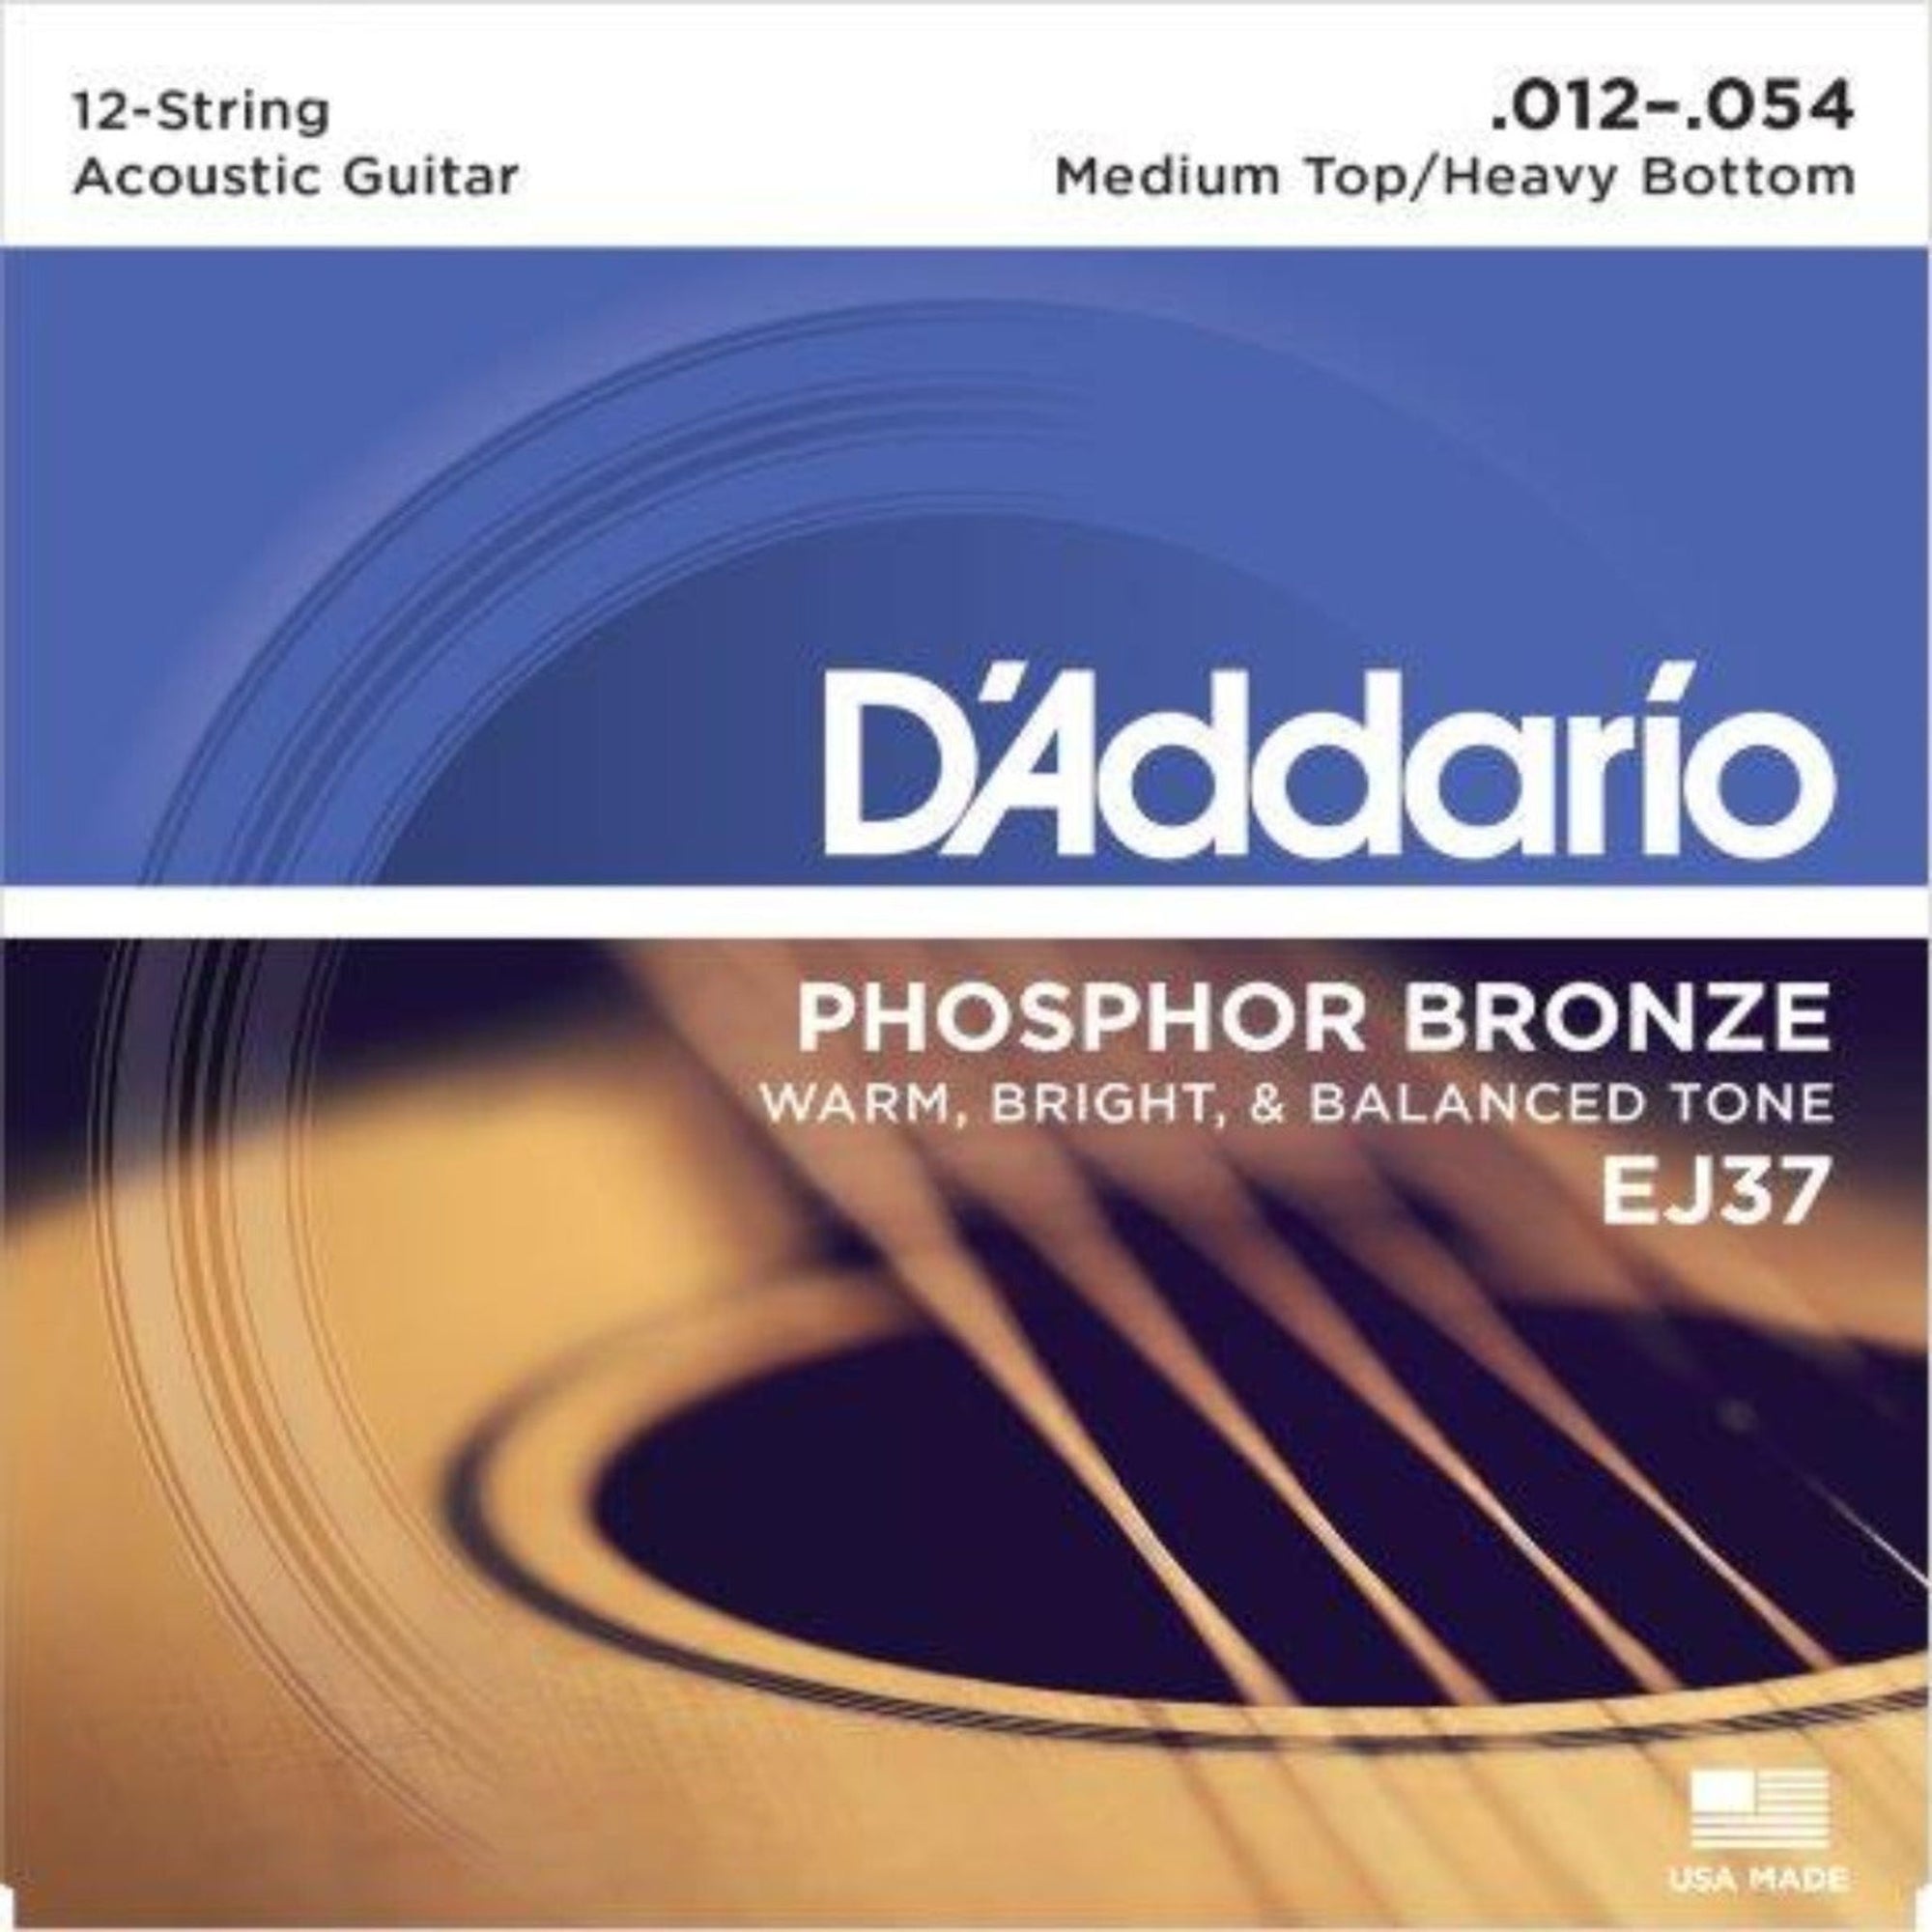 EJ37, D'Addario's medium top/heavy bottom 12-String acoustic set features the playability of a medium gauge set with the enhanced volume and projection of heavy gauge bottom strings, ideal for aggressive fingerstyle playing.